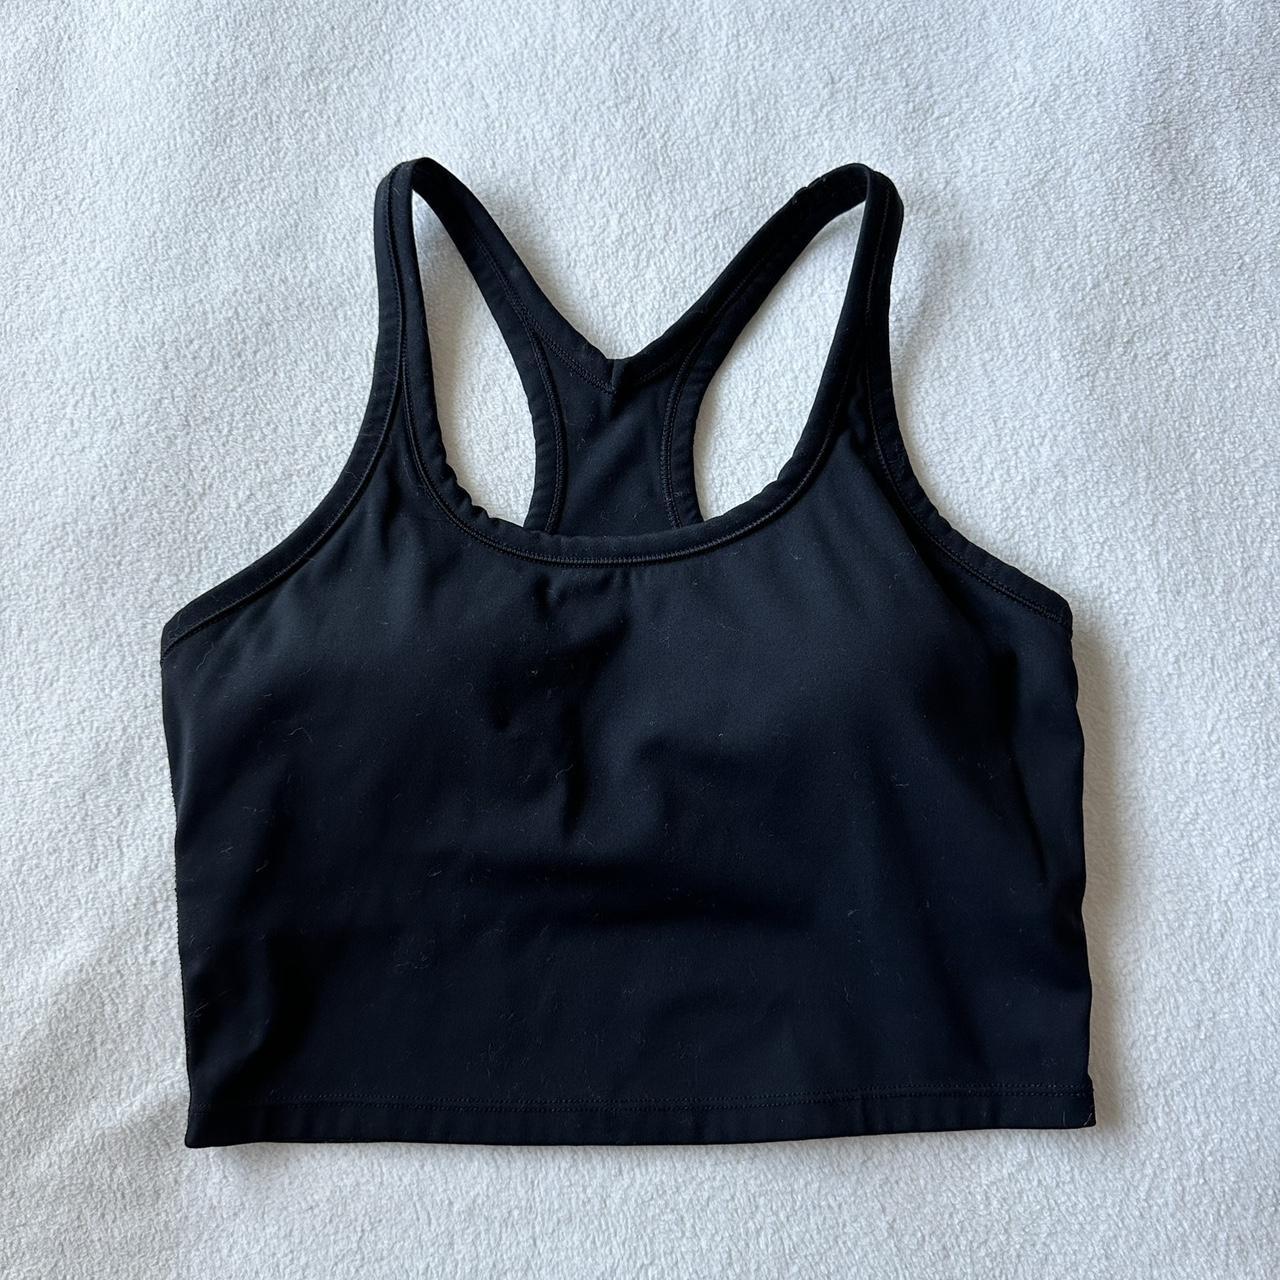 Black workout top with built-in bra. Size 4, fits a - Depop